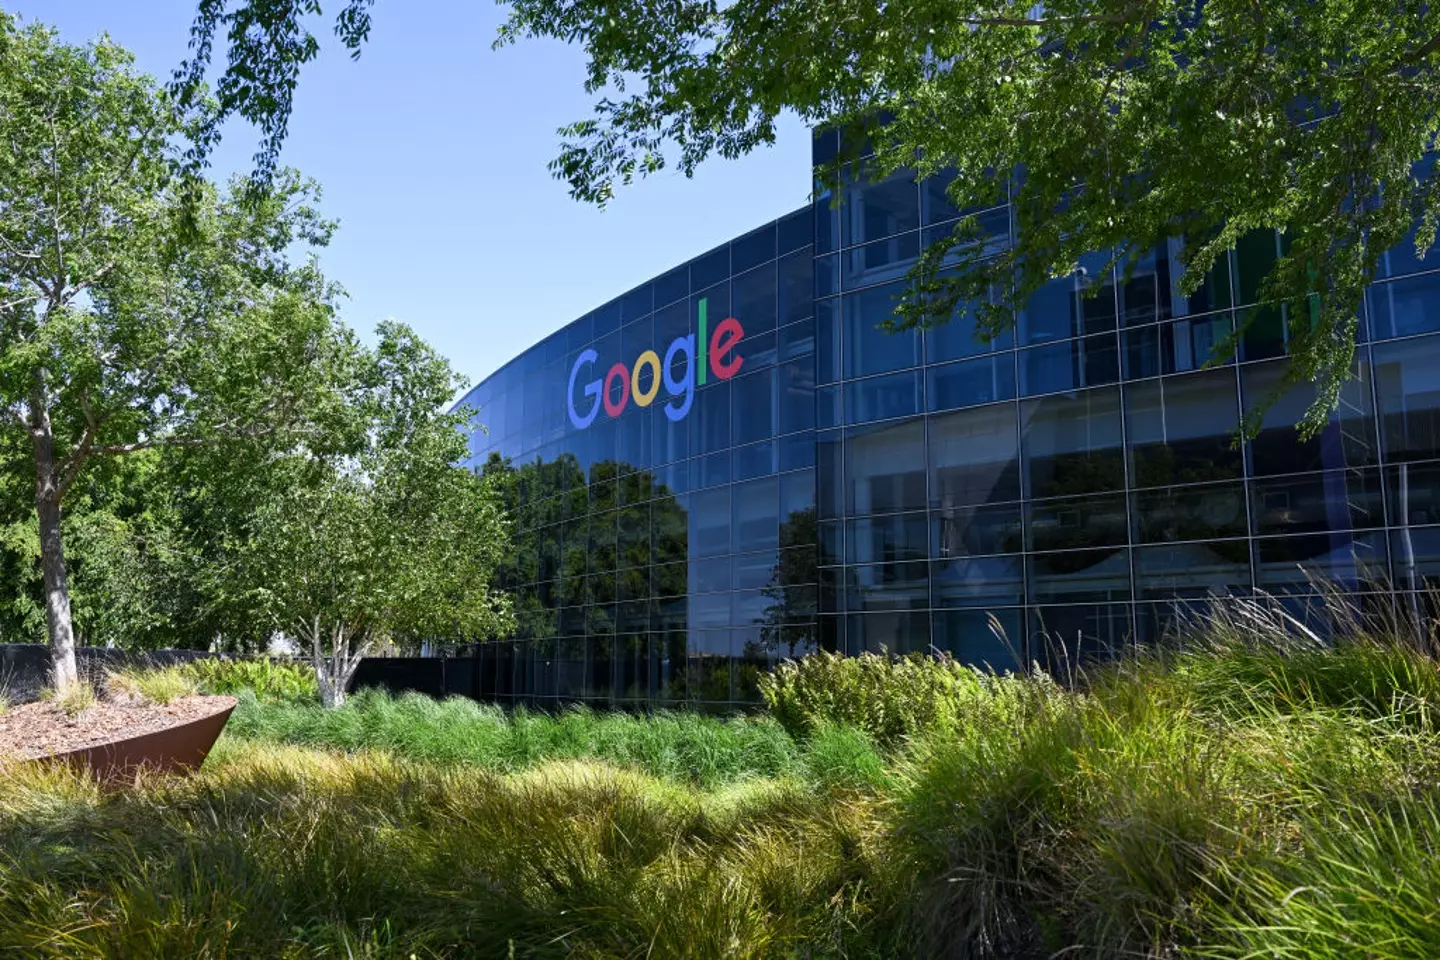 Google has to pay out a hefty sum. (Tayfun Coskun/Anadolu Agency via Getty Images)